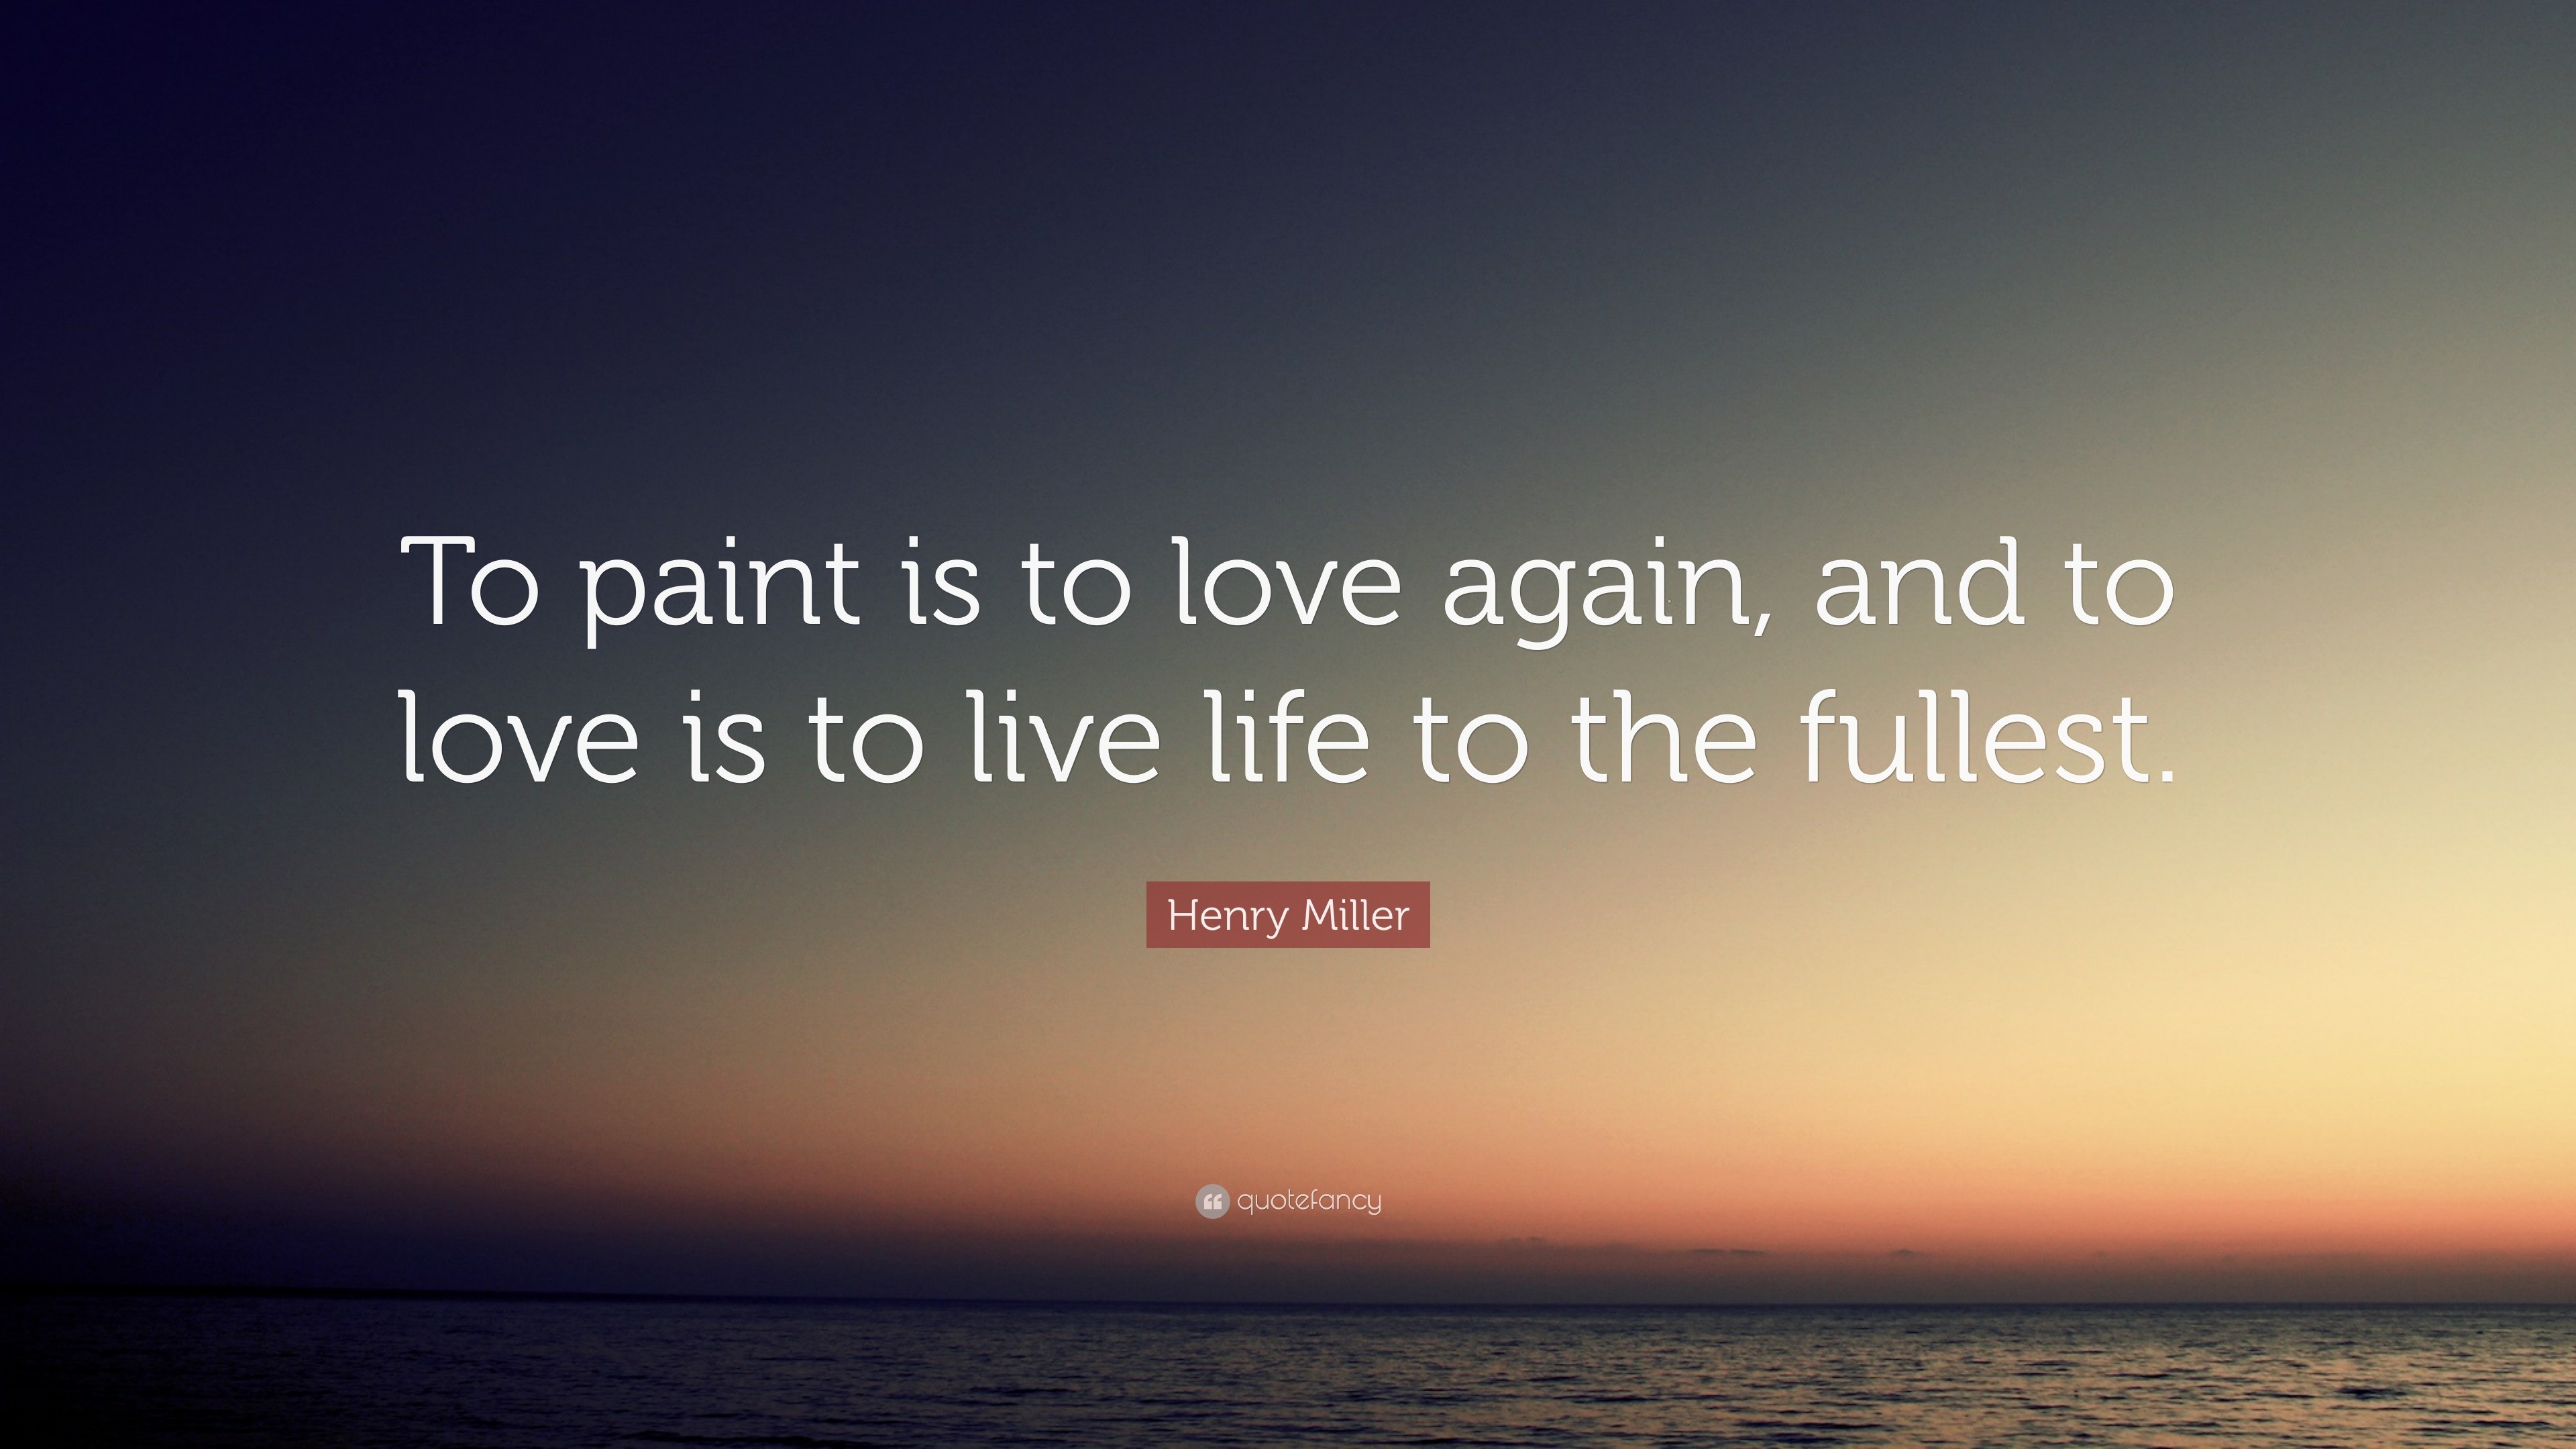 Henry Miller Quote “To paint is to love again and to love is